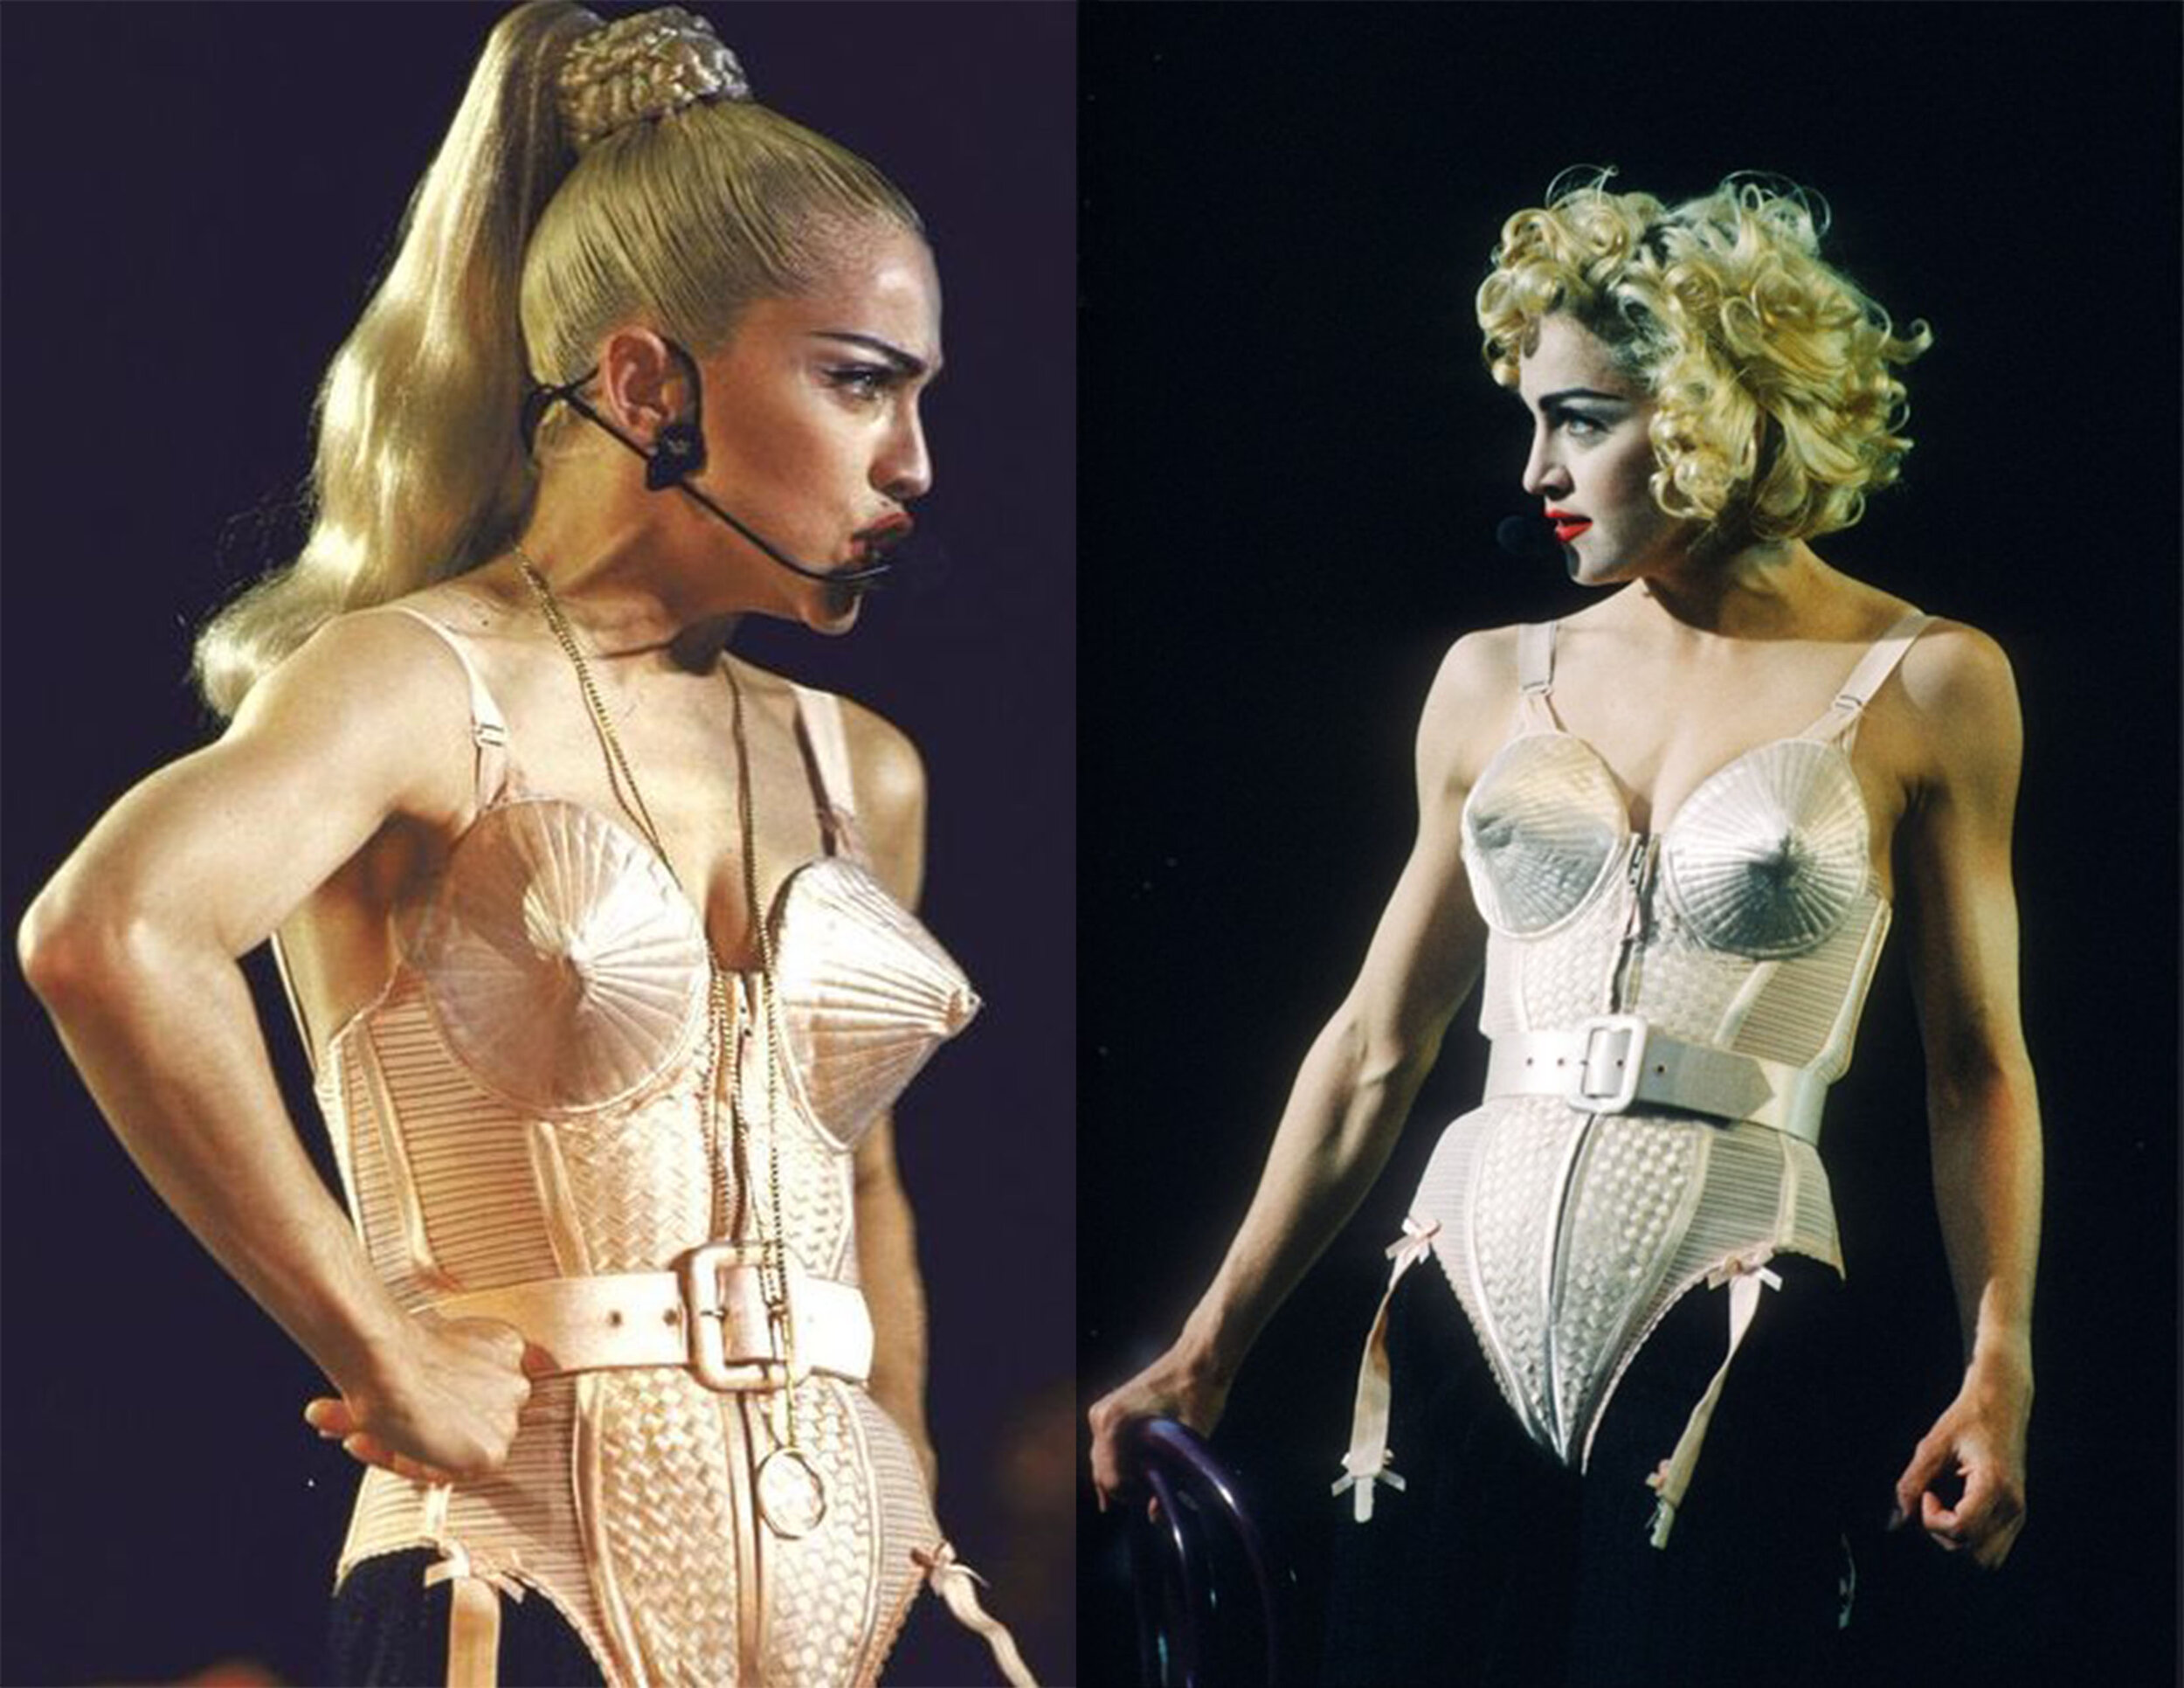 The story behind Madonna's iconic Jean Paul Gaultier cone bra - MadonnaNed